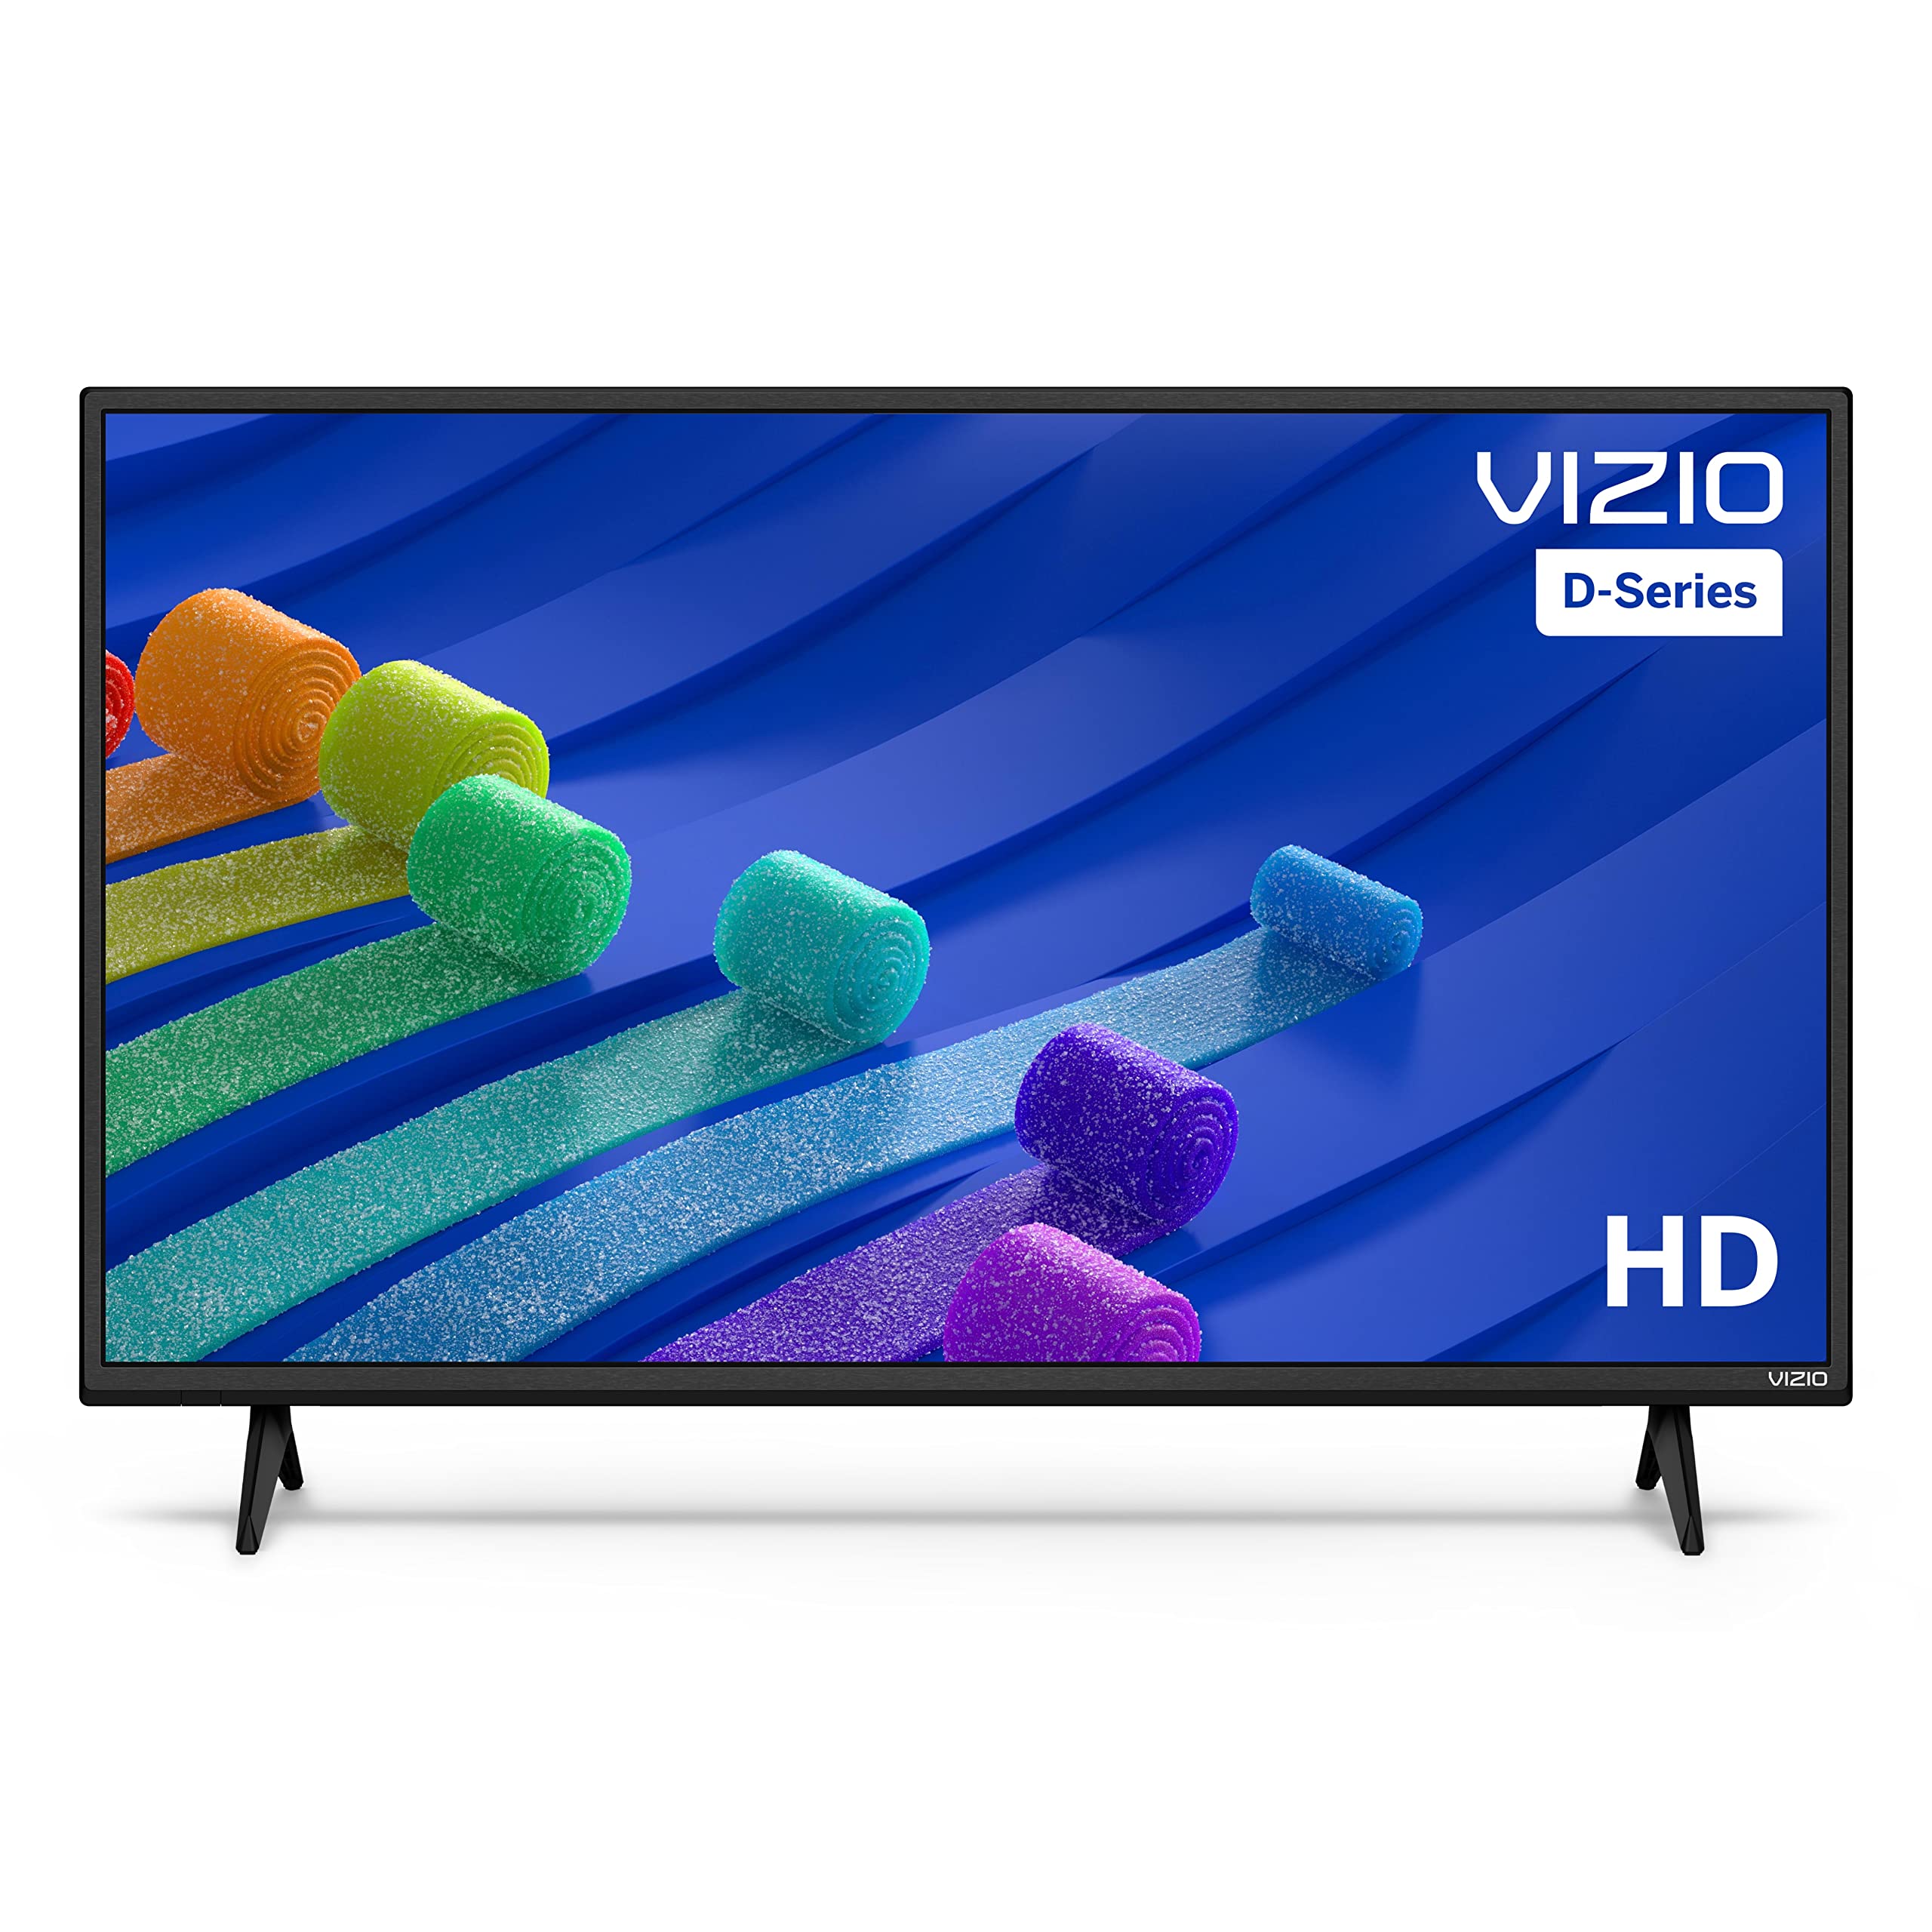 VIZIO 32-inch D-Series Full HD 720p Smart TV with Apple AirPlay and Chromecast Built-in, Alexa Compatibility, D32h-J09, 2022 Model